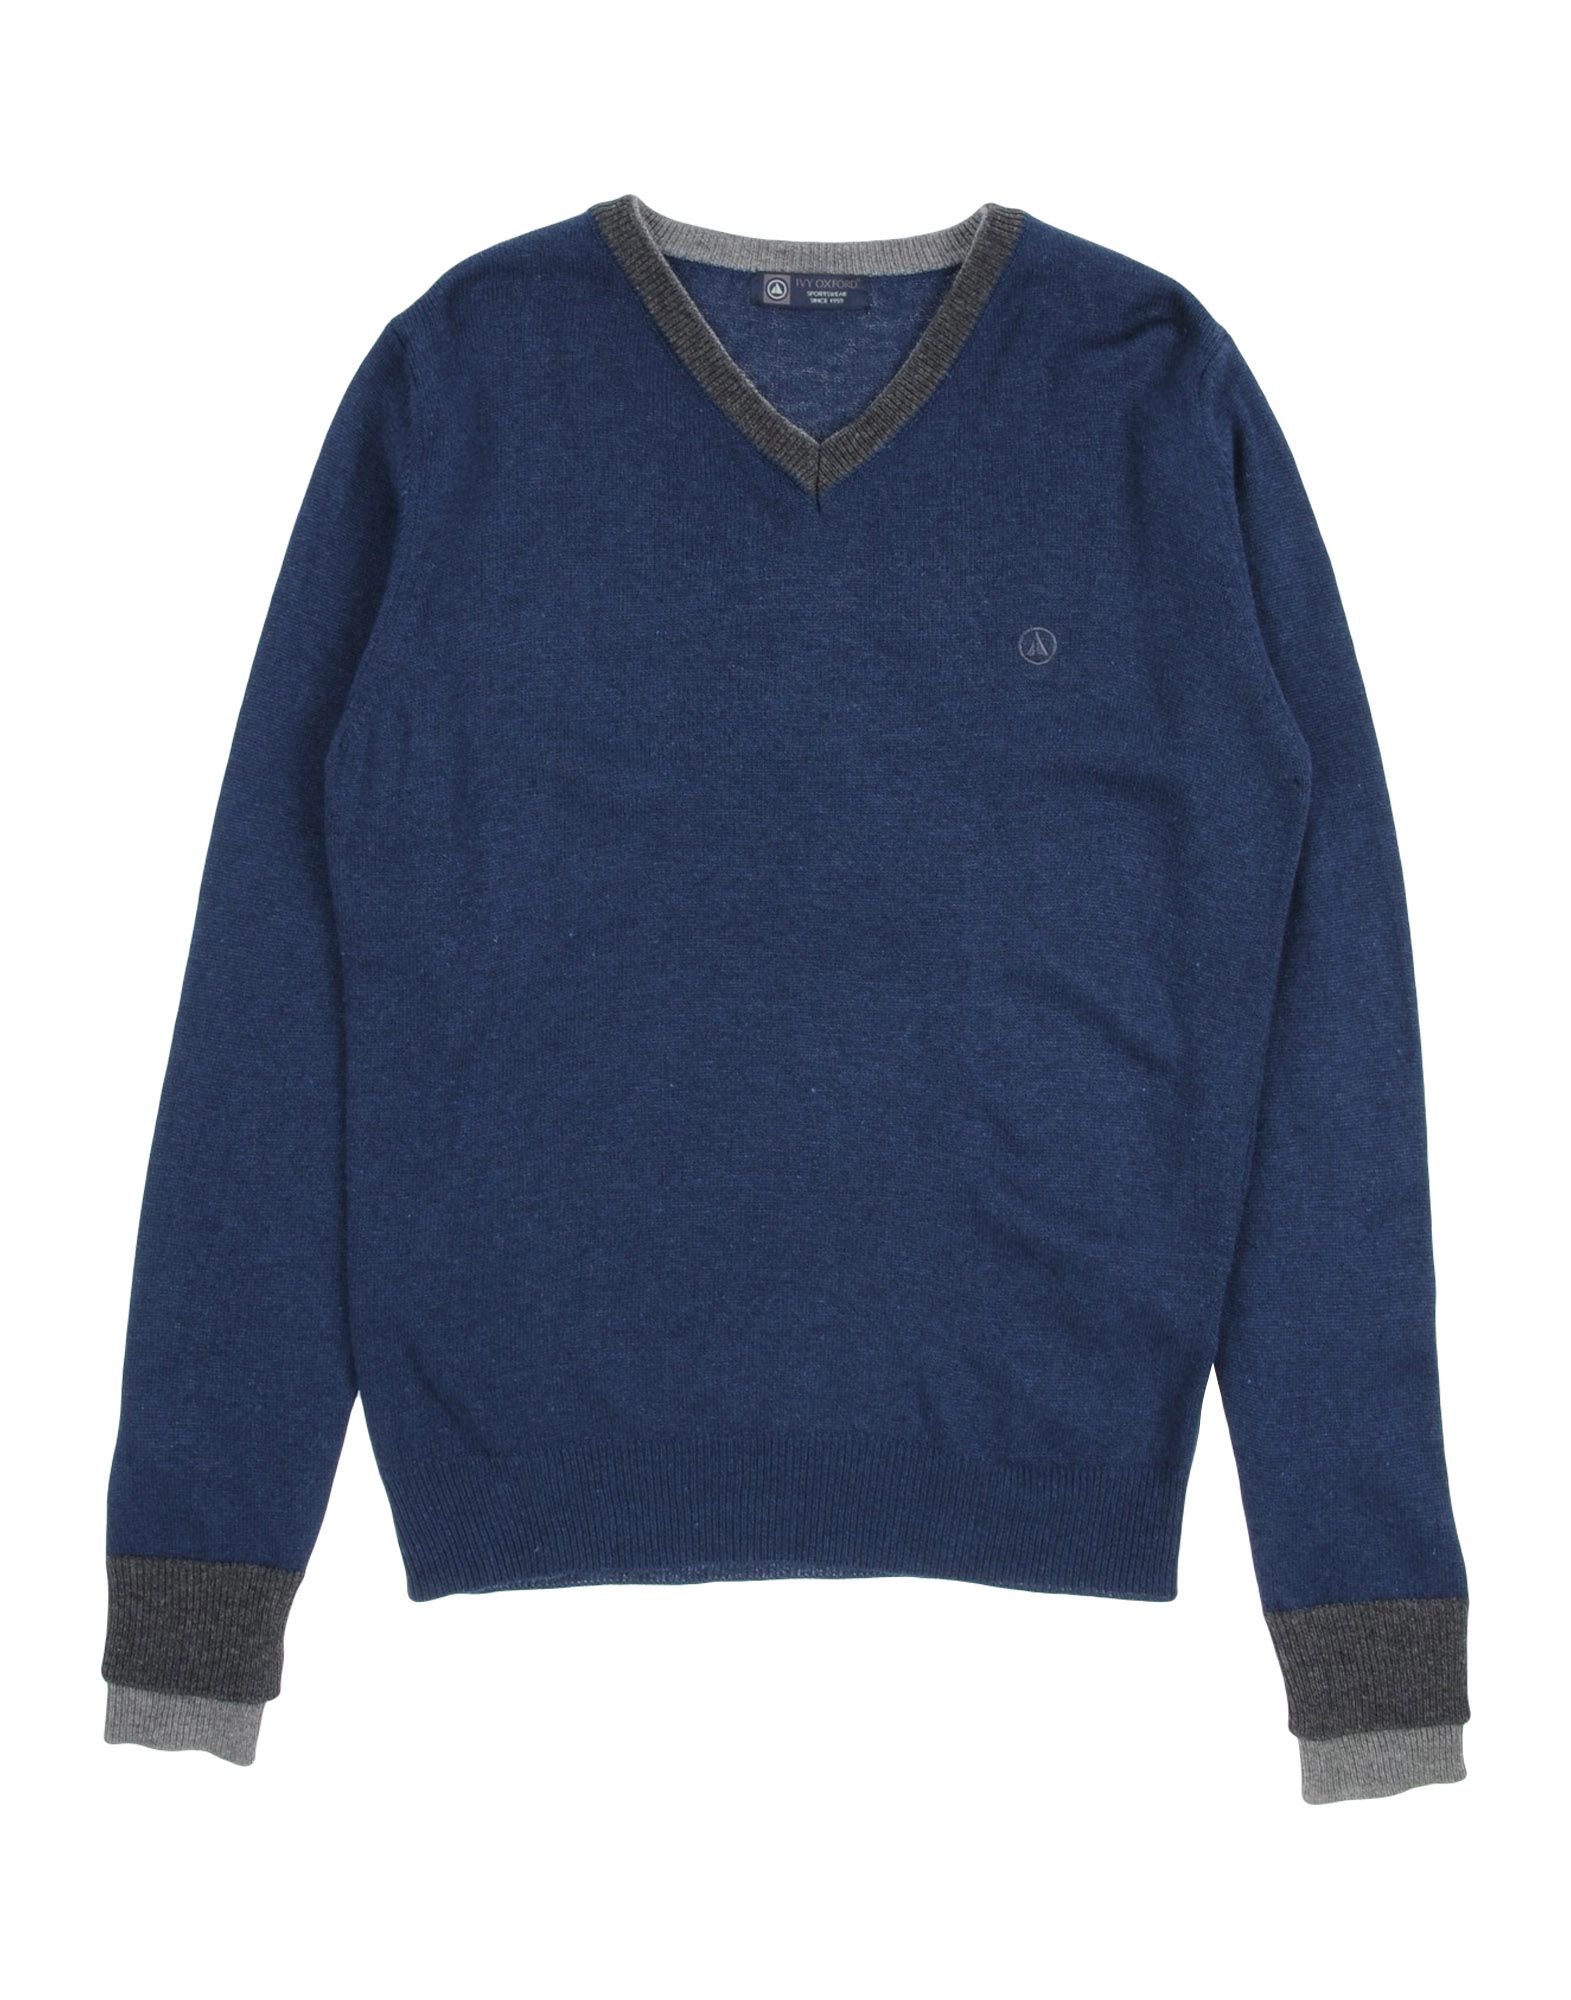 IVY OXFORD Sweater